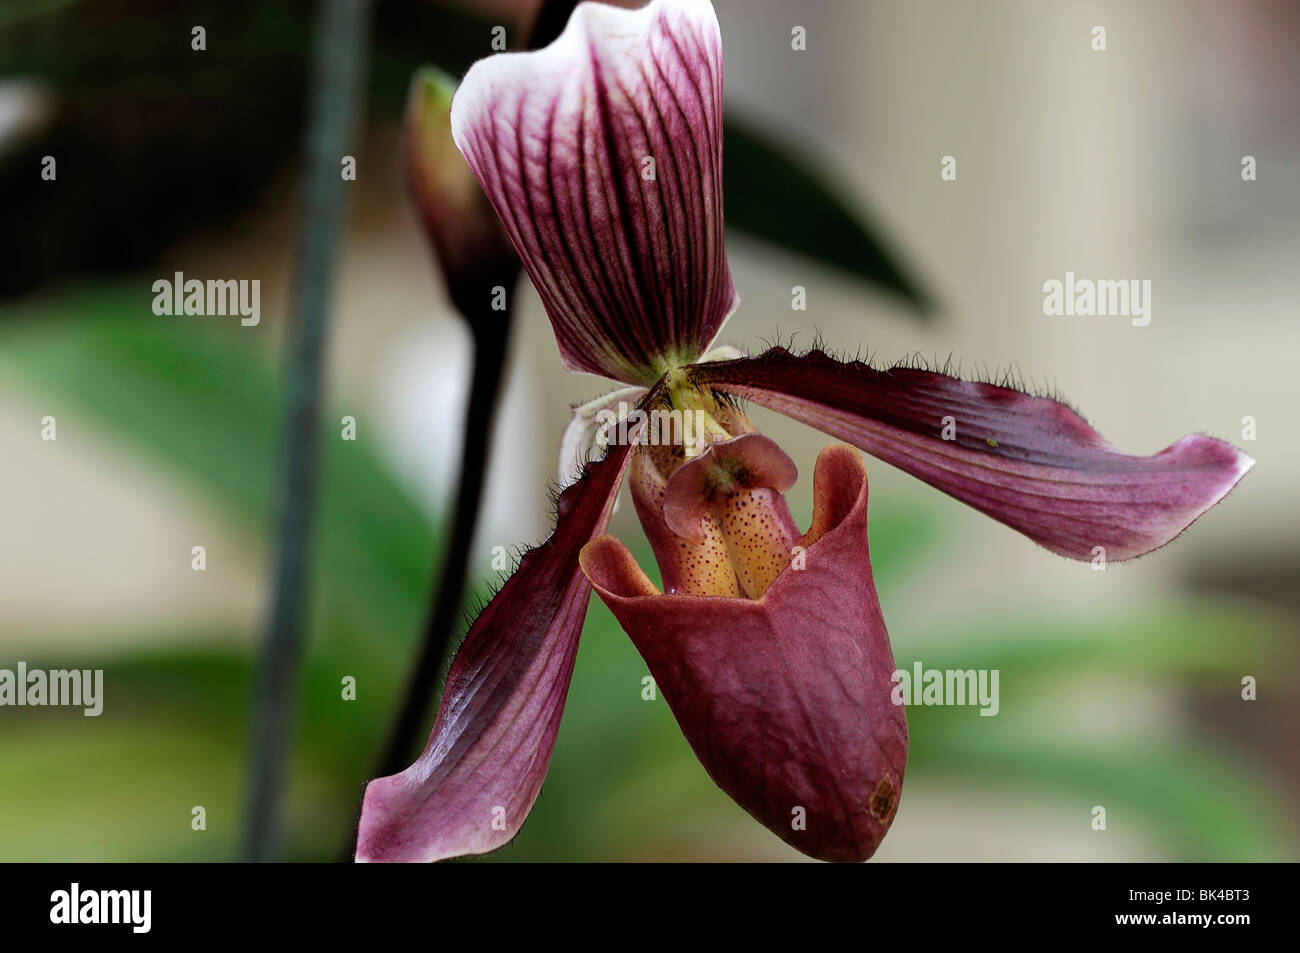 paphiopedilum hybrid greda single pink purple striped flower also known as ladys slipper orchid paph or paph orchids Stock Photo